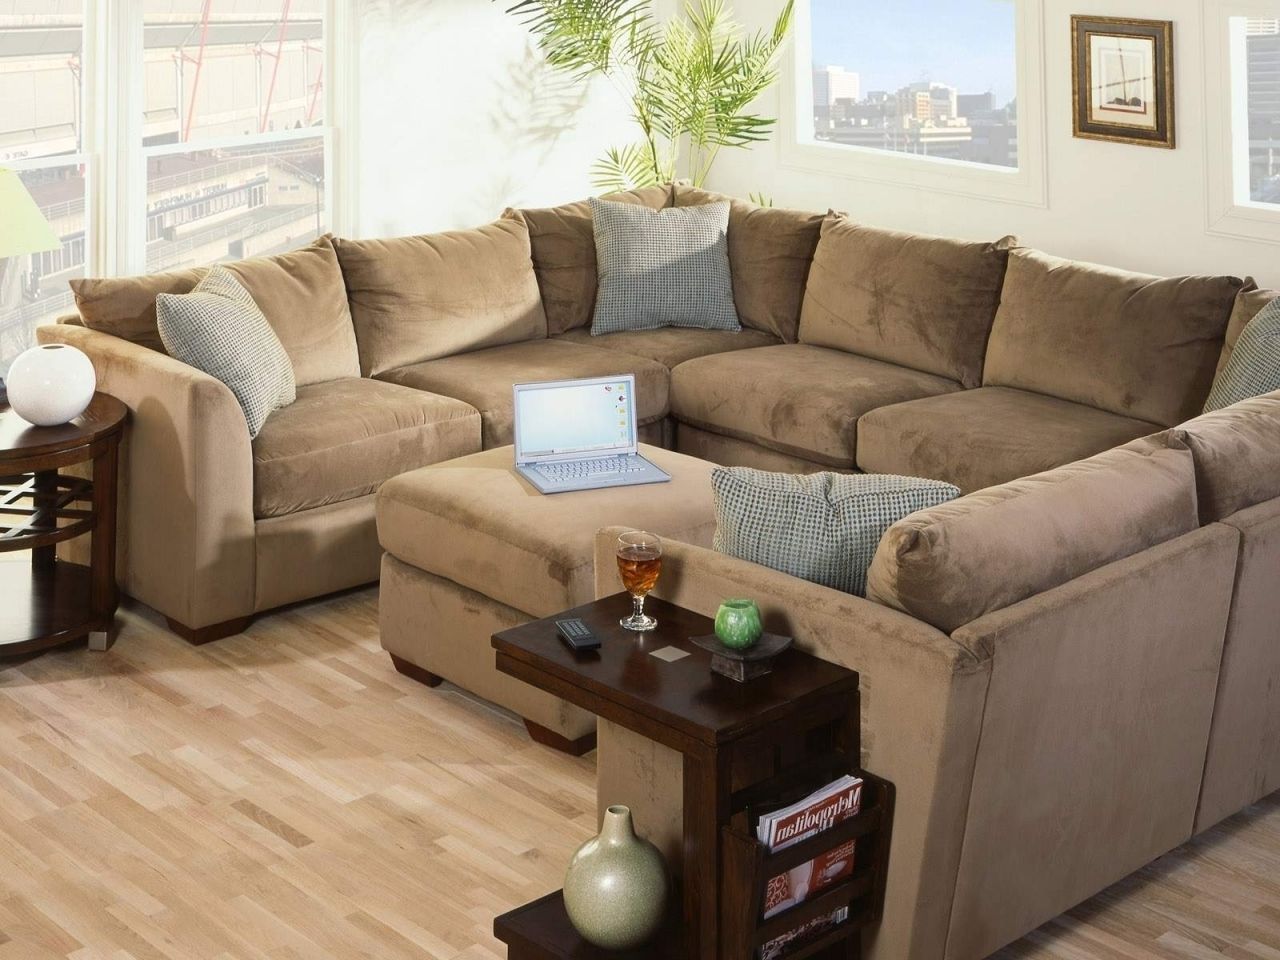 Preferred Amazing Sectional Couches Big Lots 77 On Contemporary Sofa Inside Big Lots Sofas (View 4 of 15)